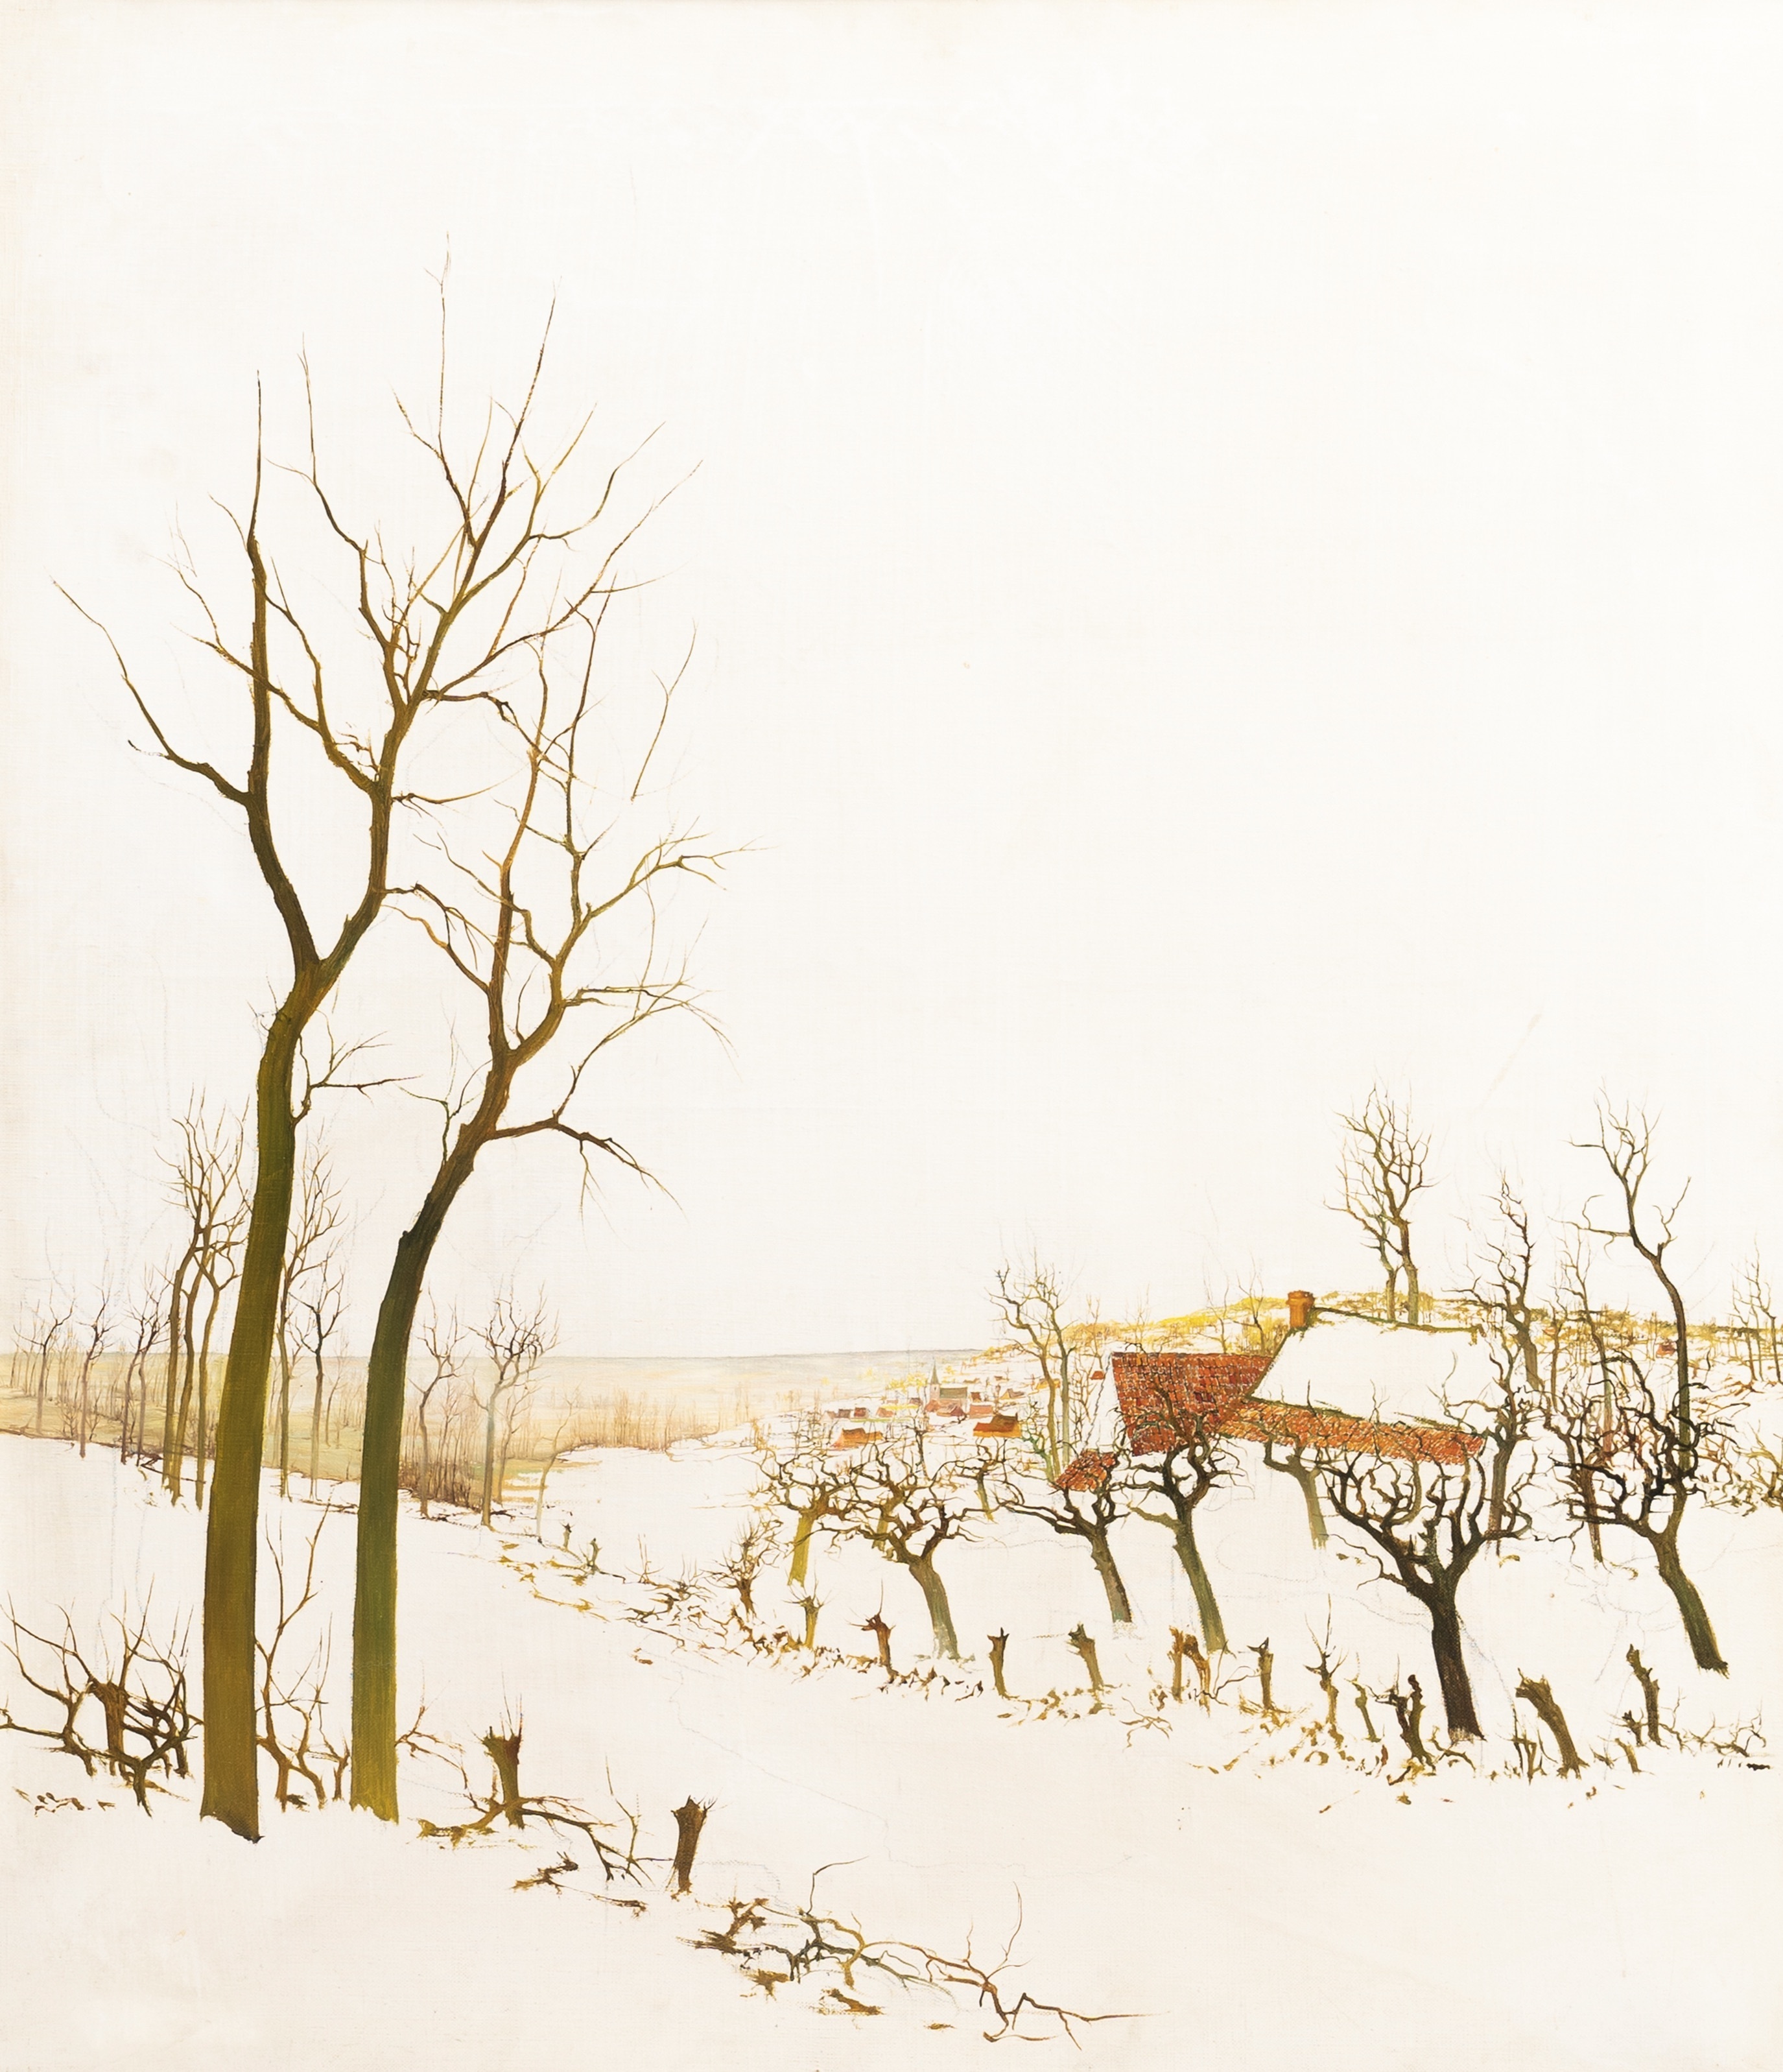 Leo Piron (1899-1962): The Flemish Ardennes in winter, oil on canvas